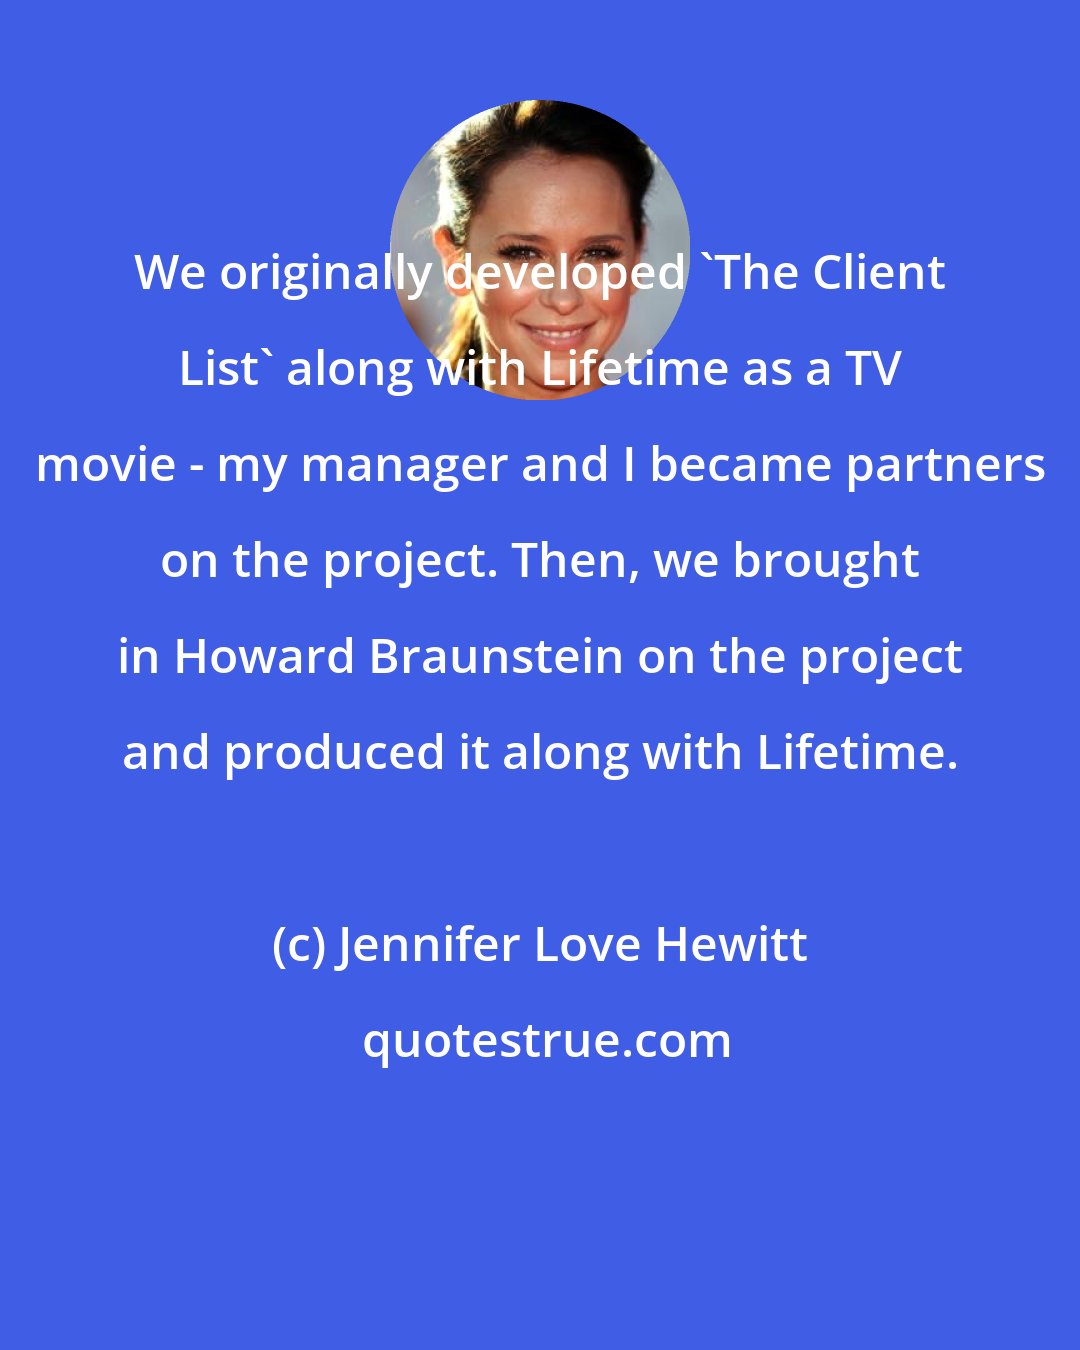 Jennifer Love Hewitt: We originally developed 'The Client List' along with Lifetime as a TV movie - my manager and I became partners on the project. Then, we brought in Howard Braunstein on the project and produced it along with Lifetime.